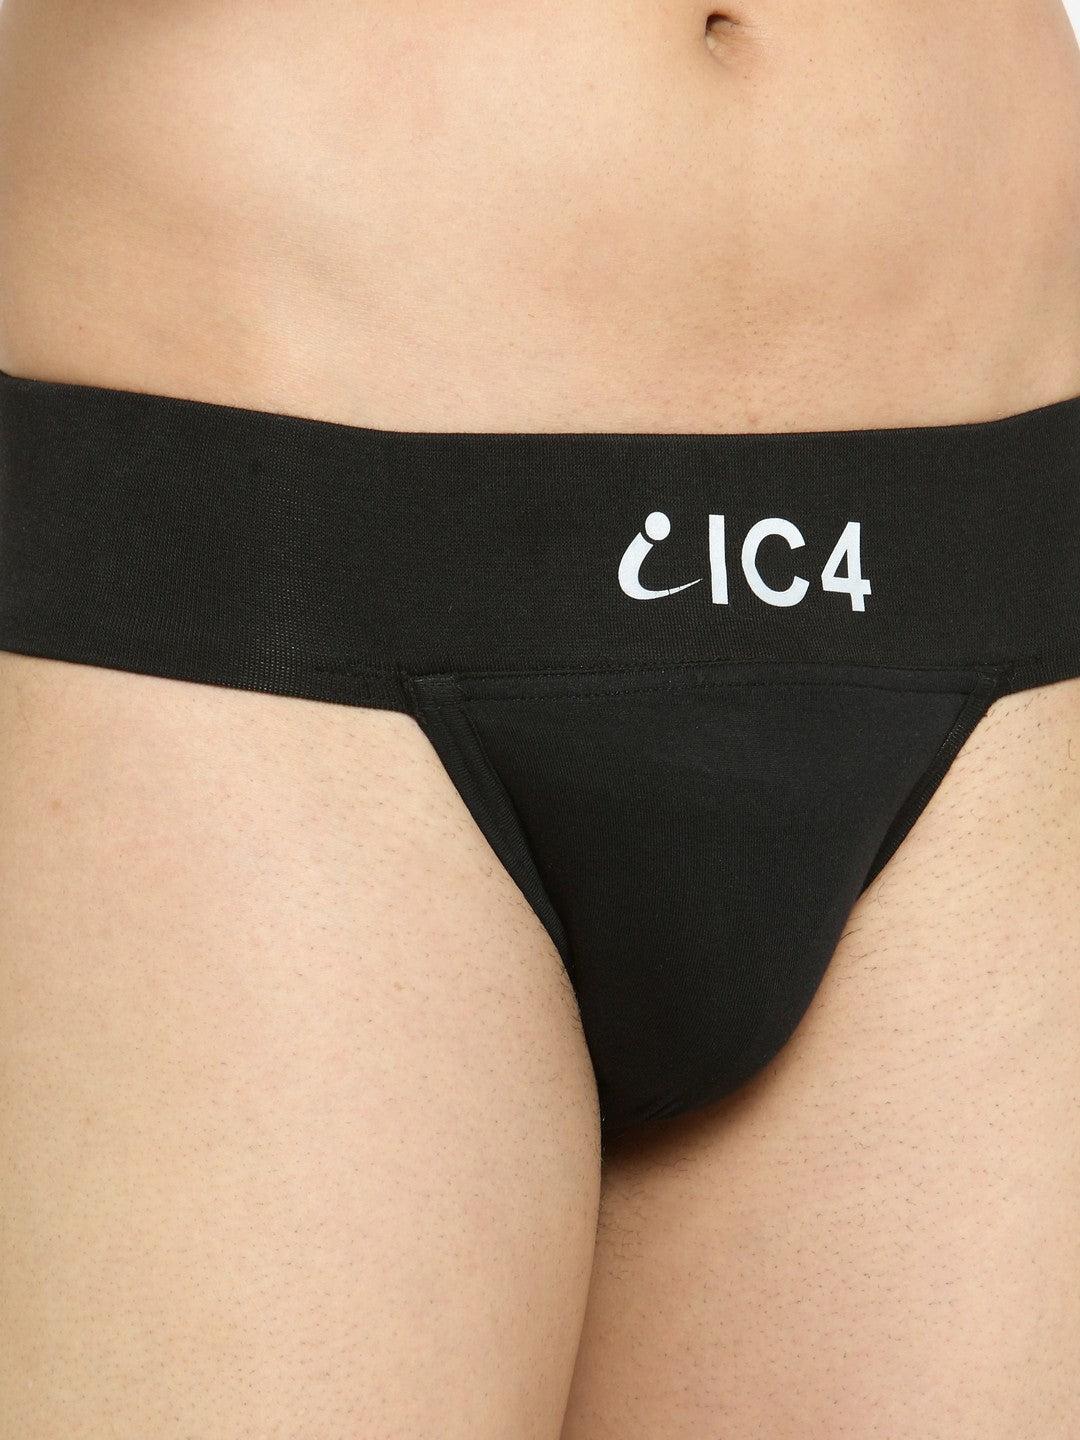 IC4 Men's Gym Supporter Combo Pack of 2